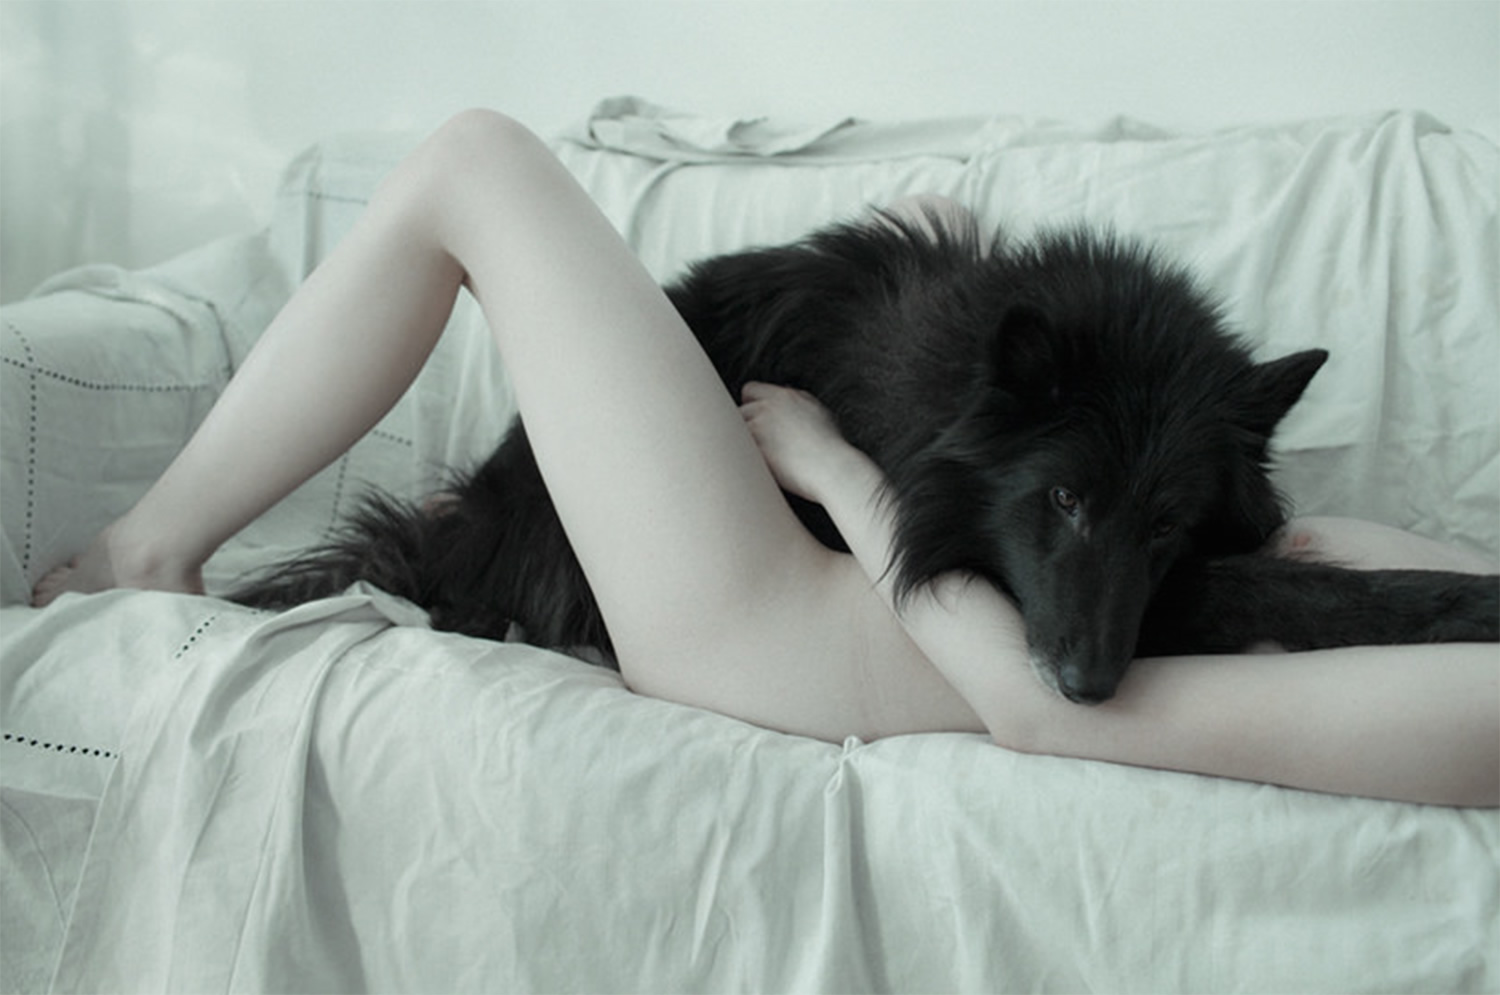 black dog lying over woman, couch. photo by Laura Makabresku